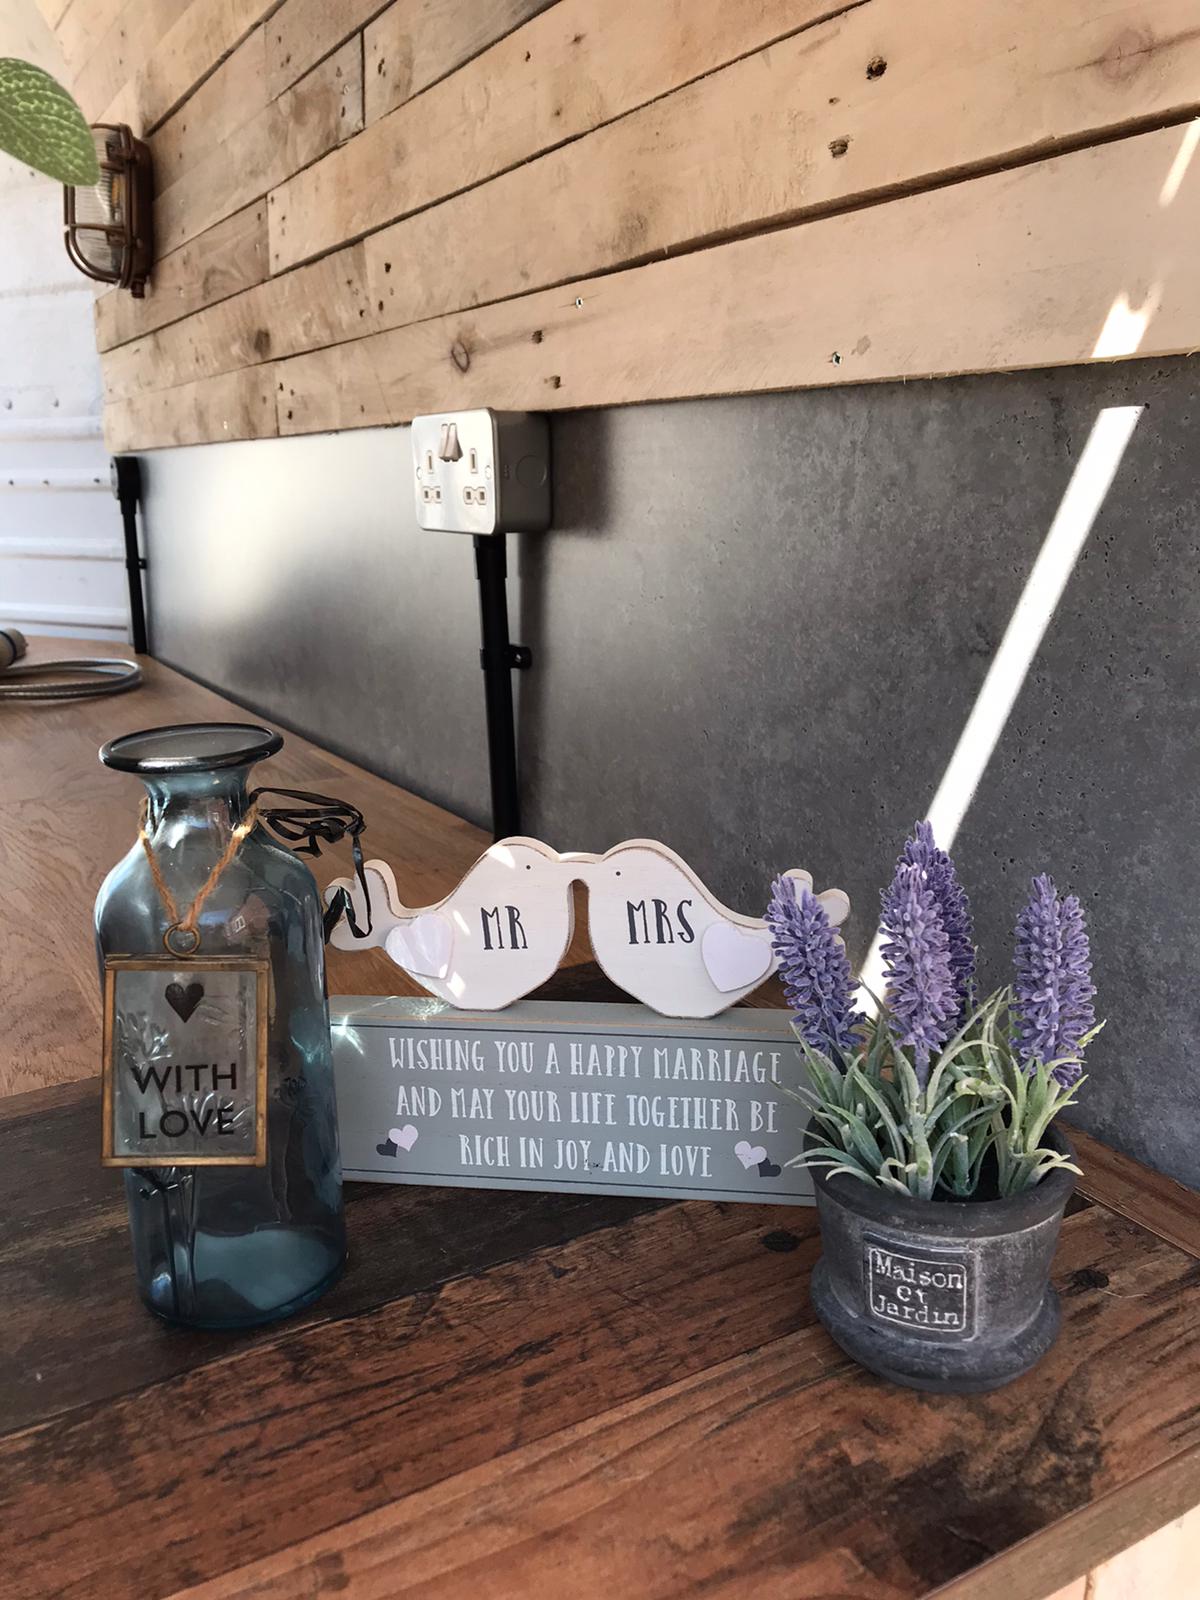 A wooden bar with a bottle that says 'with love' on it, an ornament of two birds marked 'Mr' and 'Mrs' and a small vase of lavender